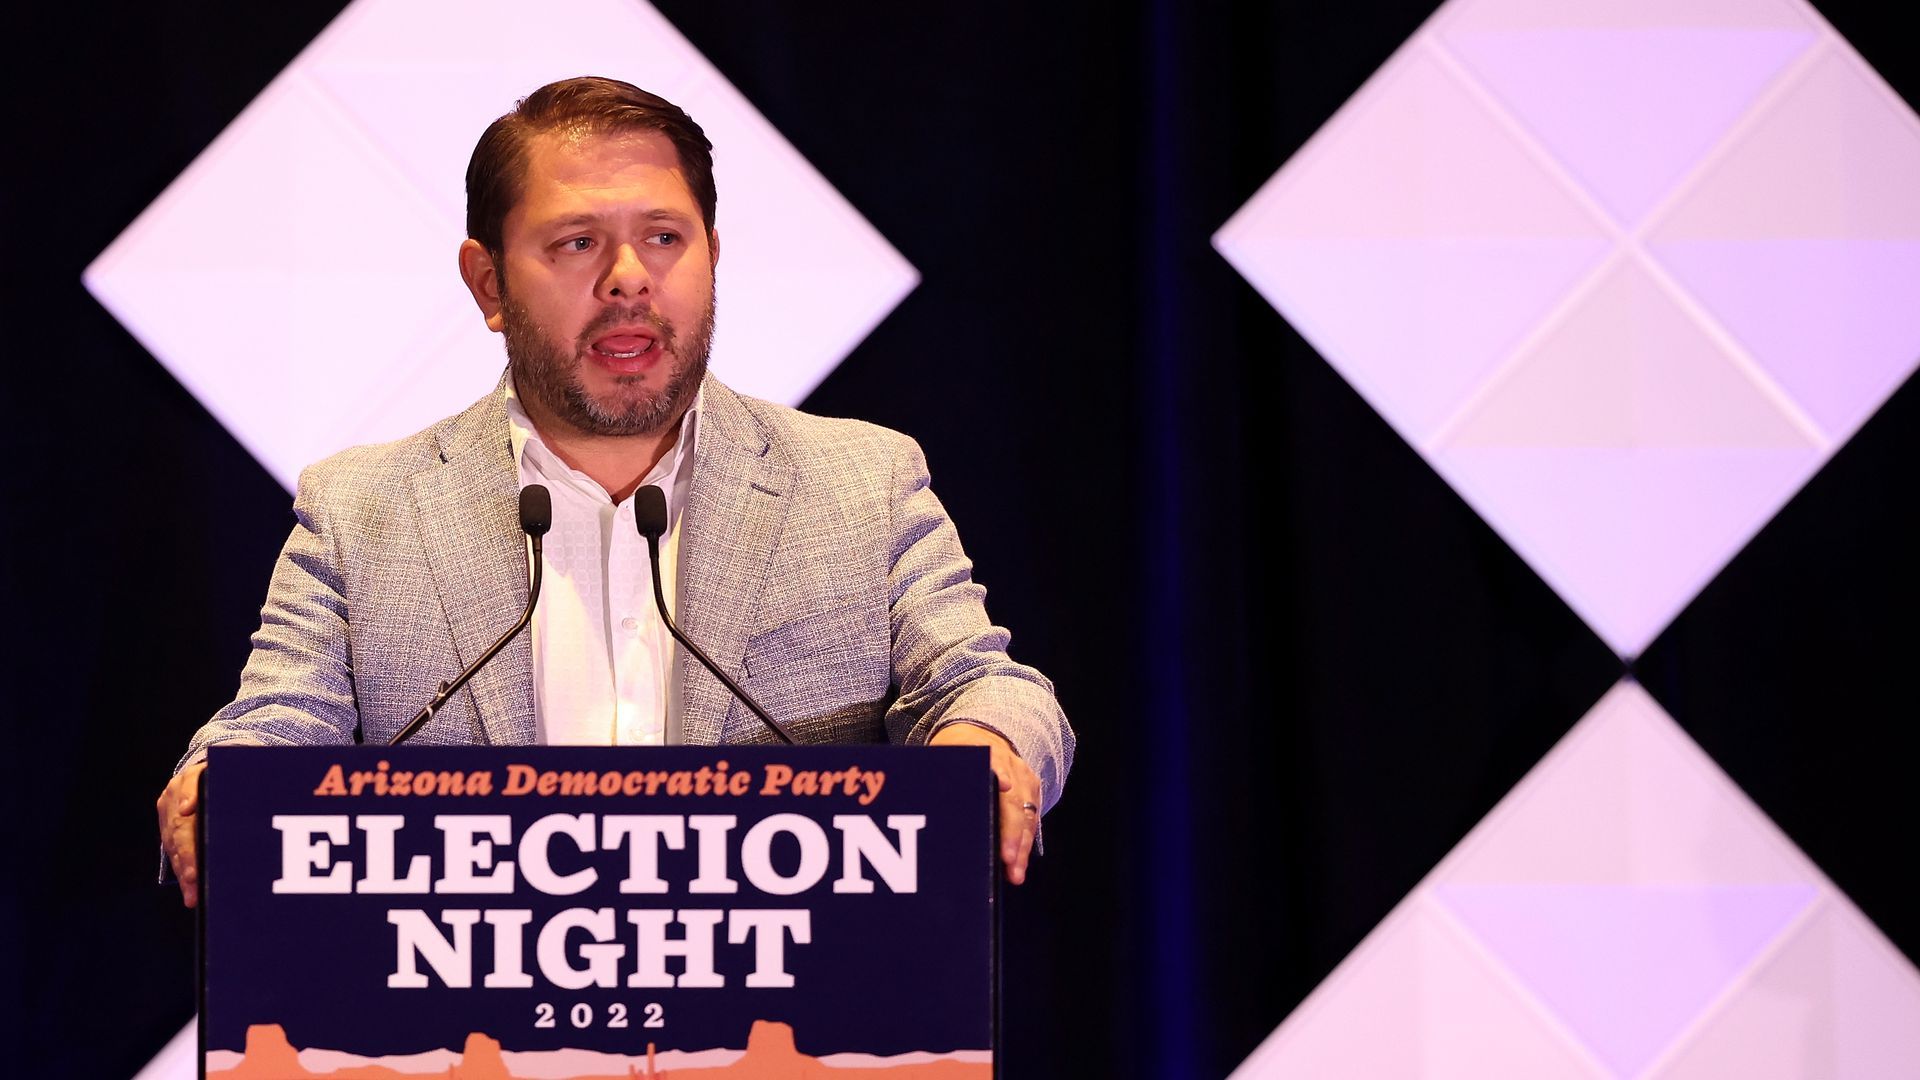 U.S. Rep. Ruben Gallego of Arizona stands at a podium with the Arizona Democratic Party